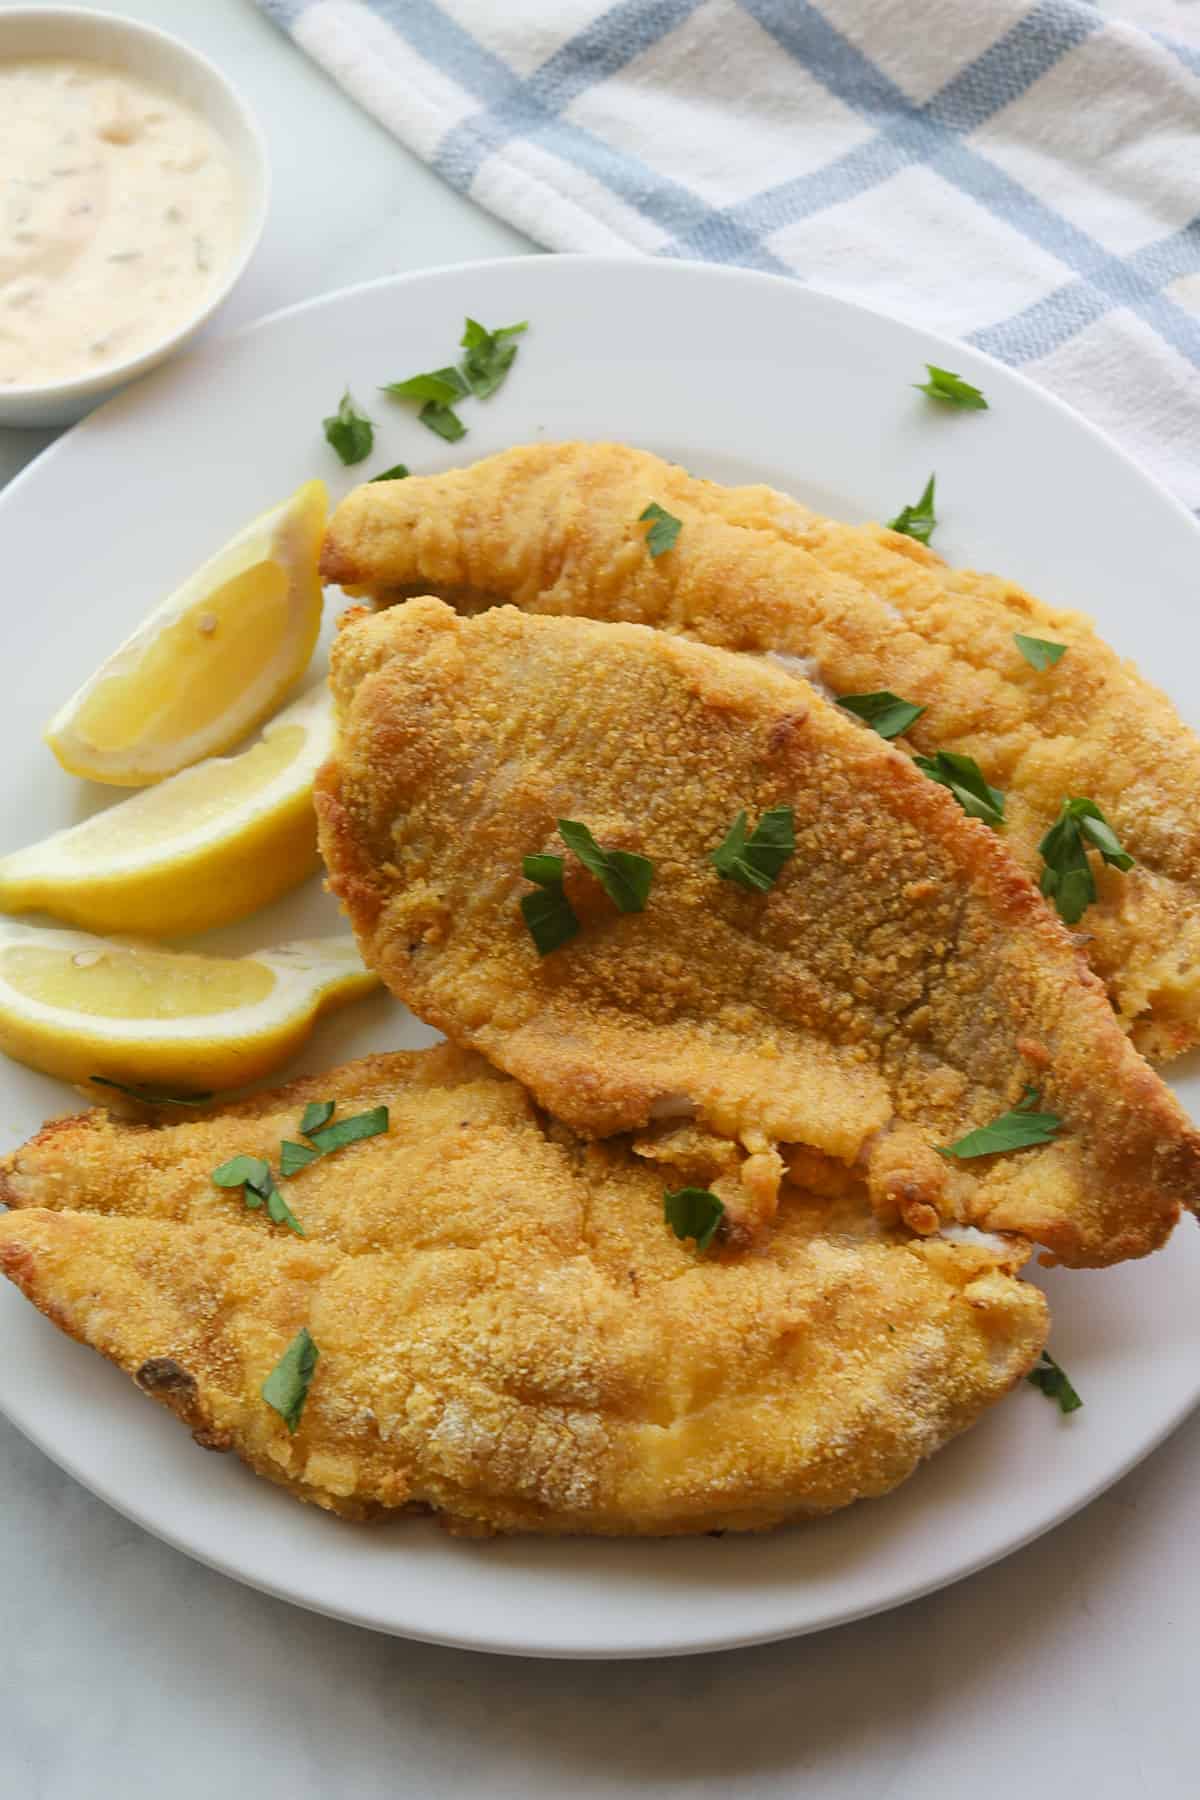 3 golden crusted fish fillets on a plate, garnished with lemon wedges and parsley leaves